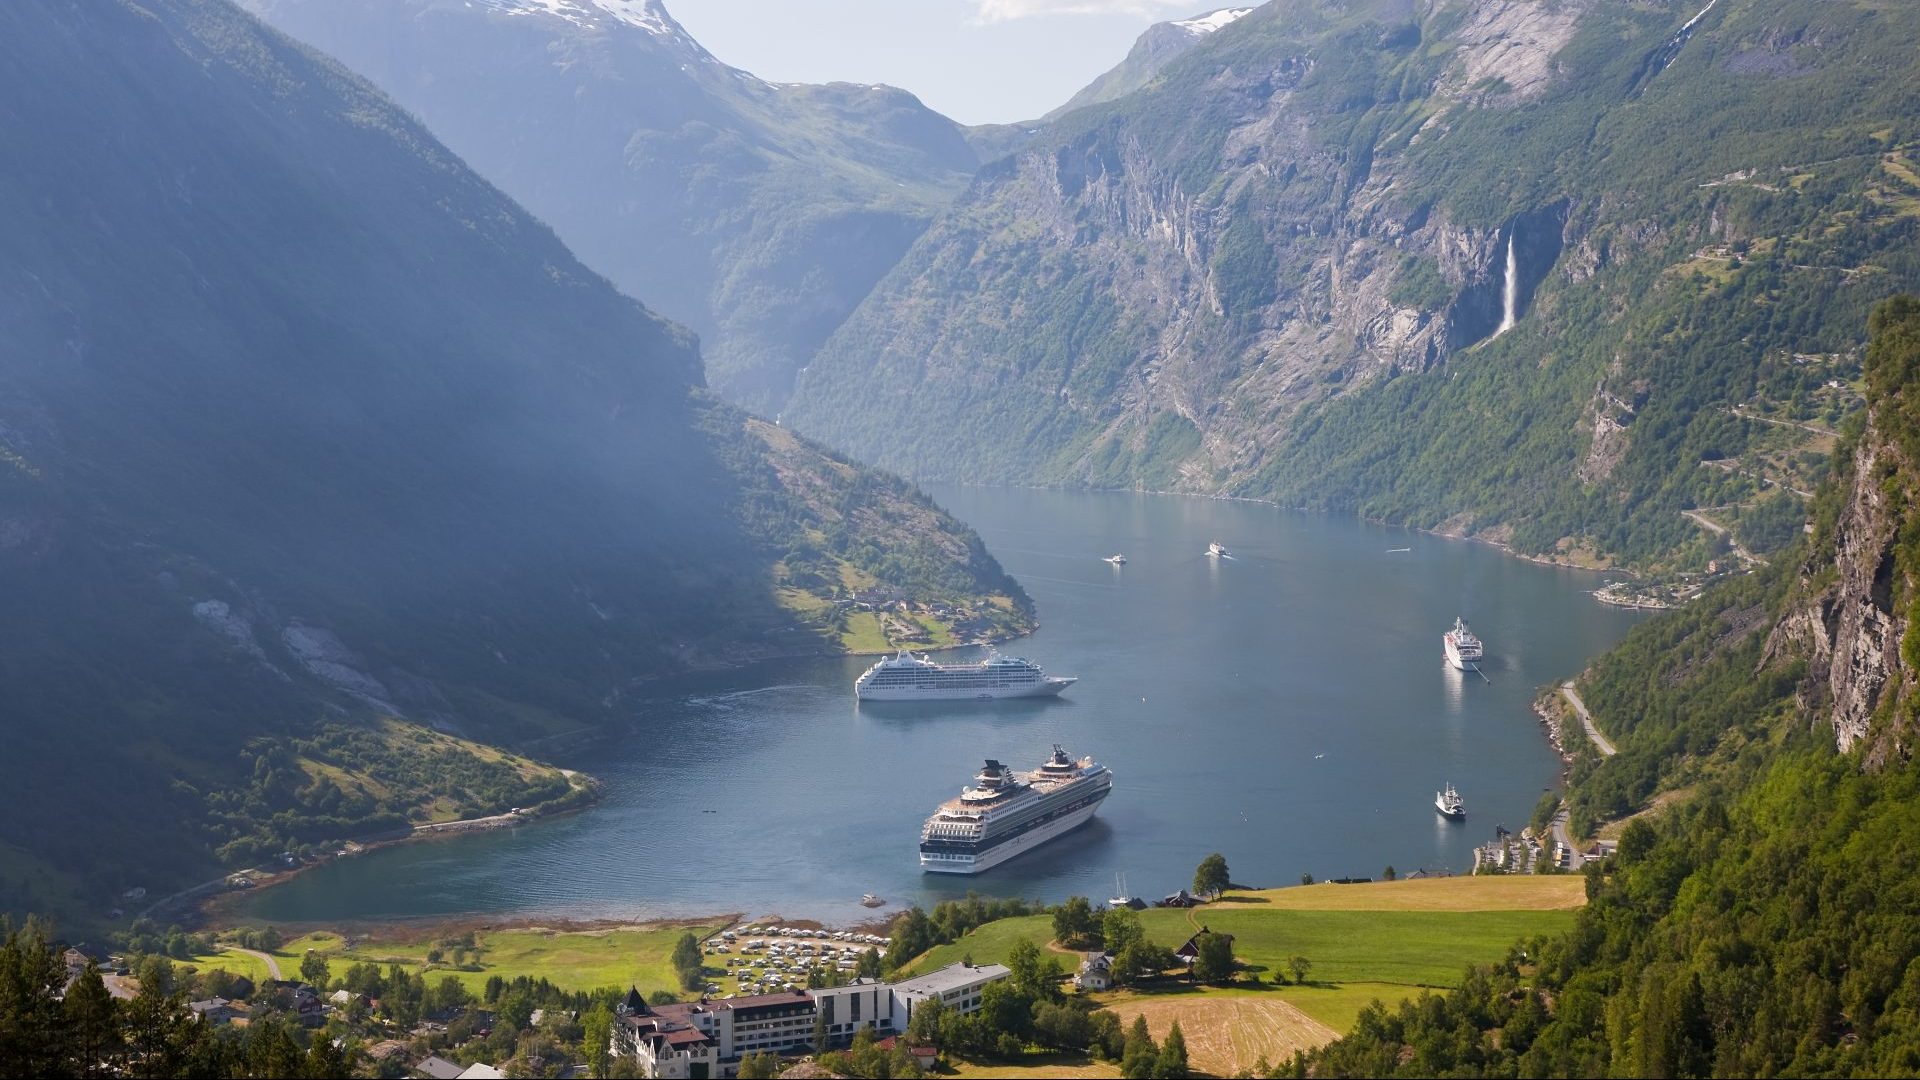 Unesco world heritage site Geirangerfjord will no longer allow polluting vessels from 2026. Photo: Peter Adams/Getty